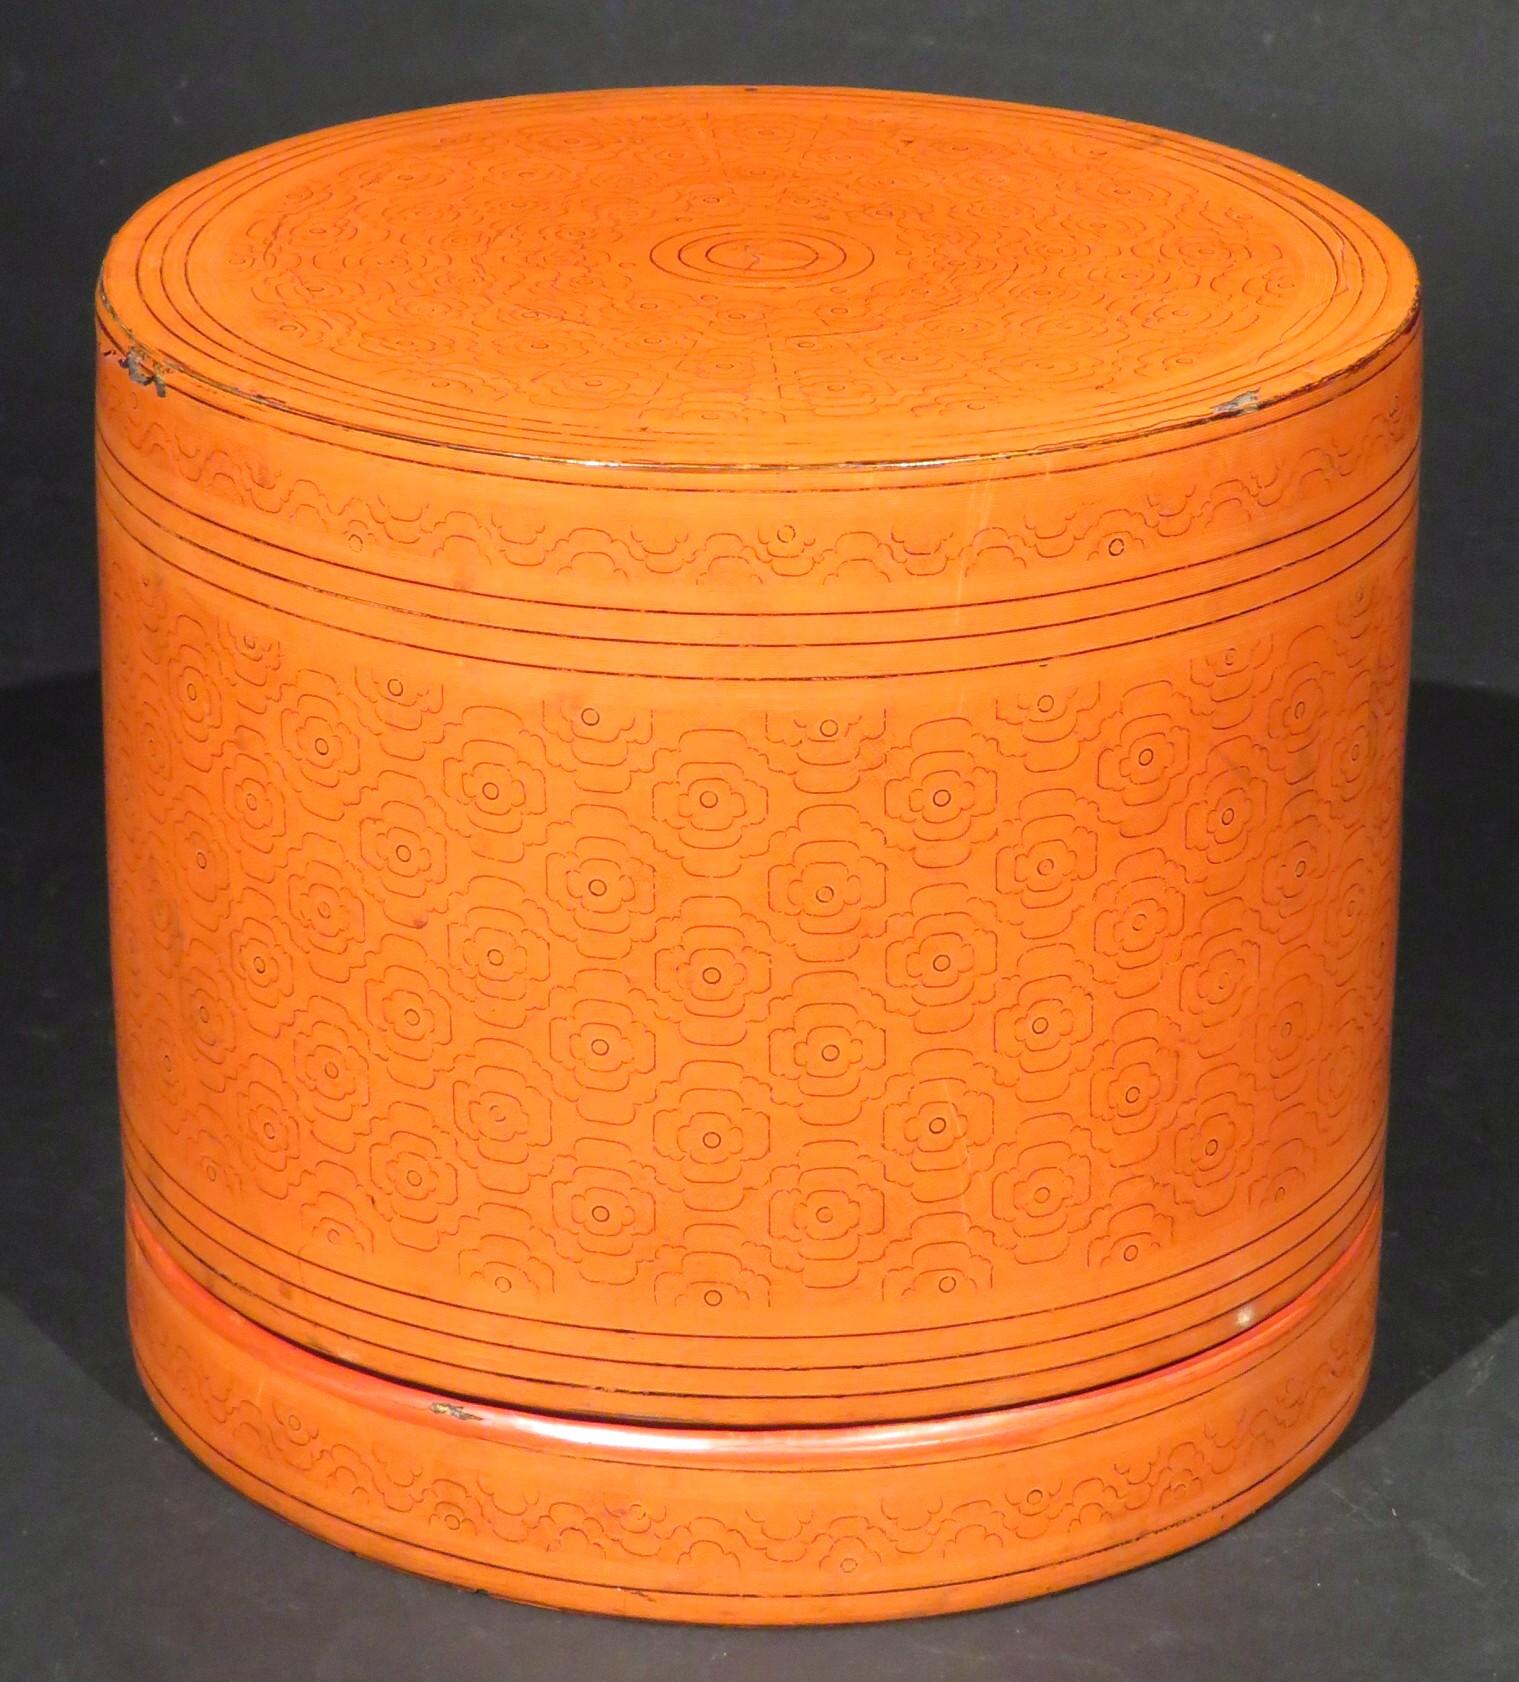 The vermillion lacquered cylindrical body decorated overall with repeating bands of curvilinear geometric motifs, the cover lifting to reveal both of its original trays intended to hold betel leaves, along with ingredients used for making betel